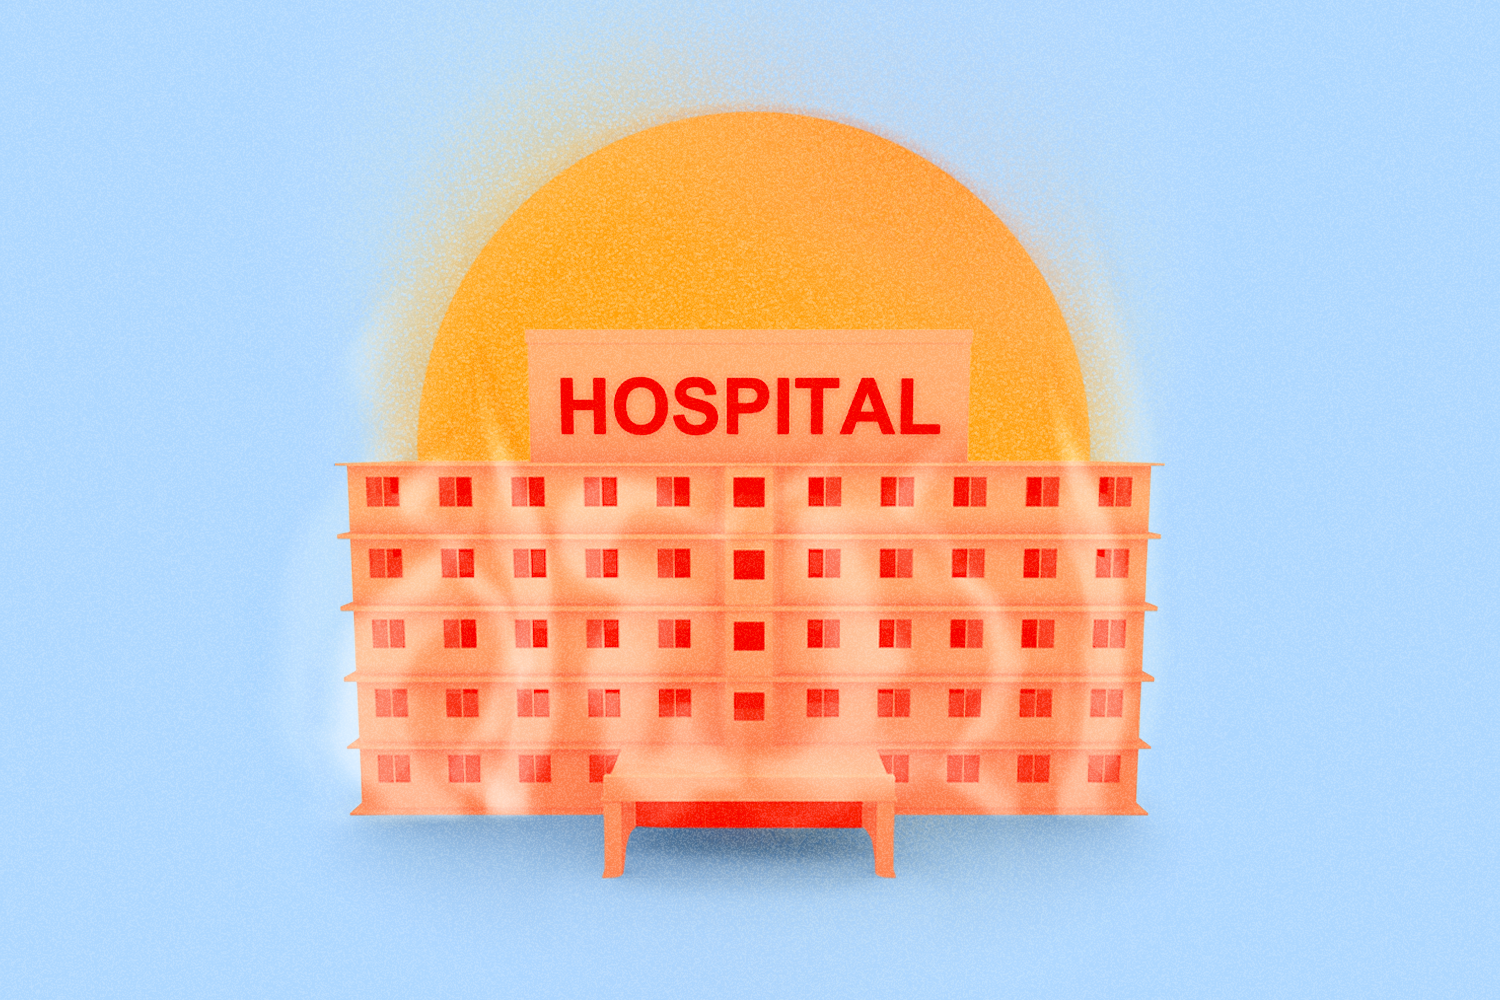 A hospital in flames with the sun in the background emitting rays on a light blue backdrop